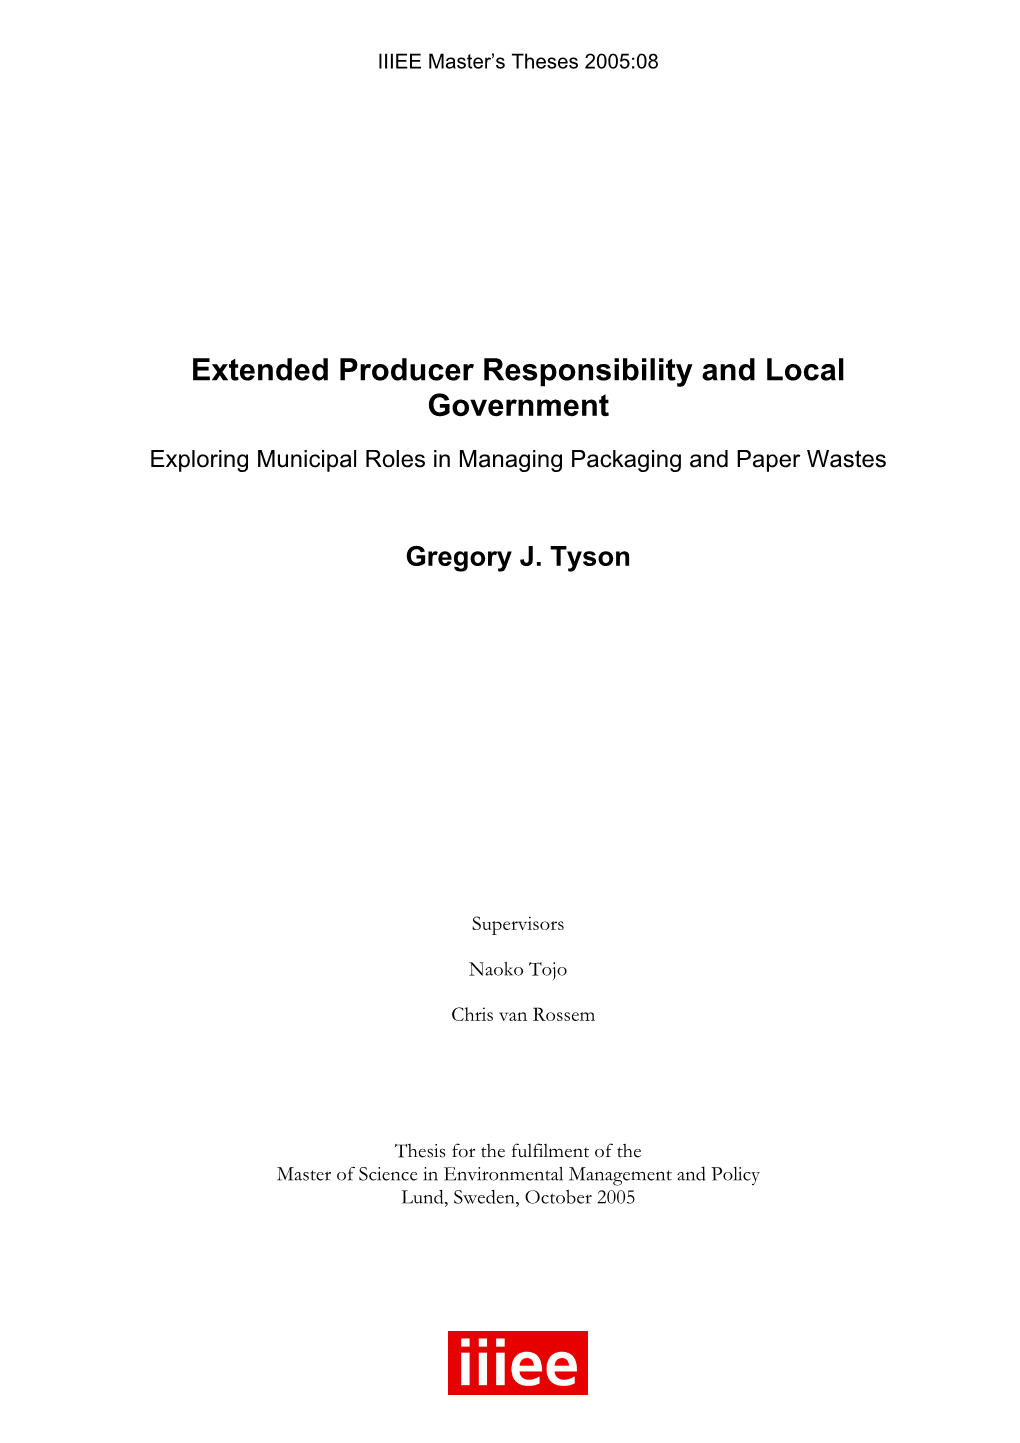 Extended Producer Responsibility and Local Government